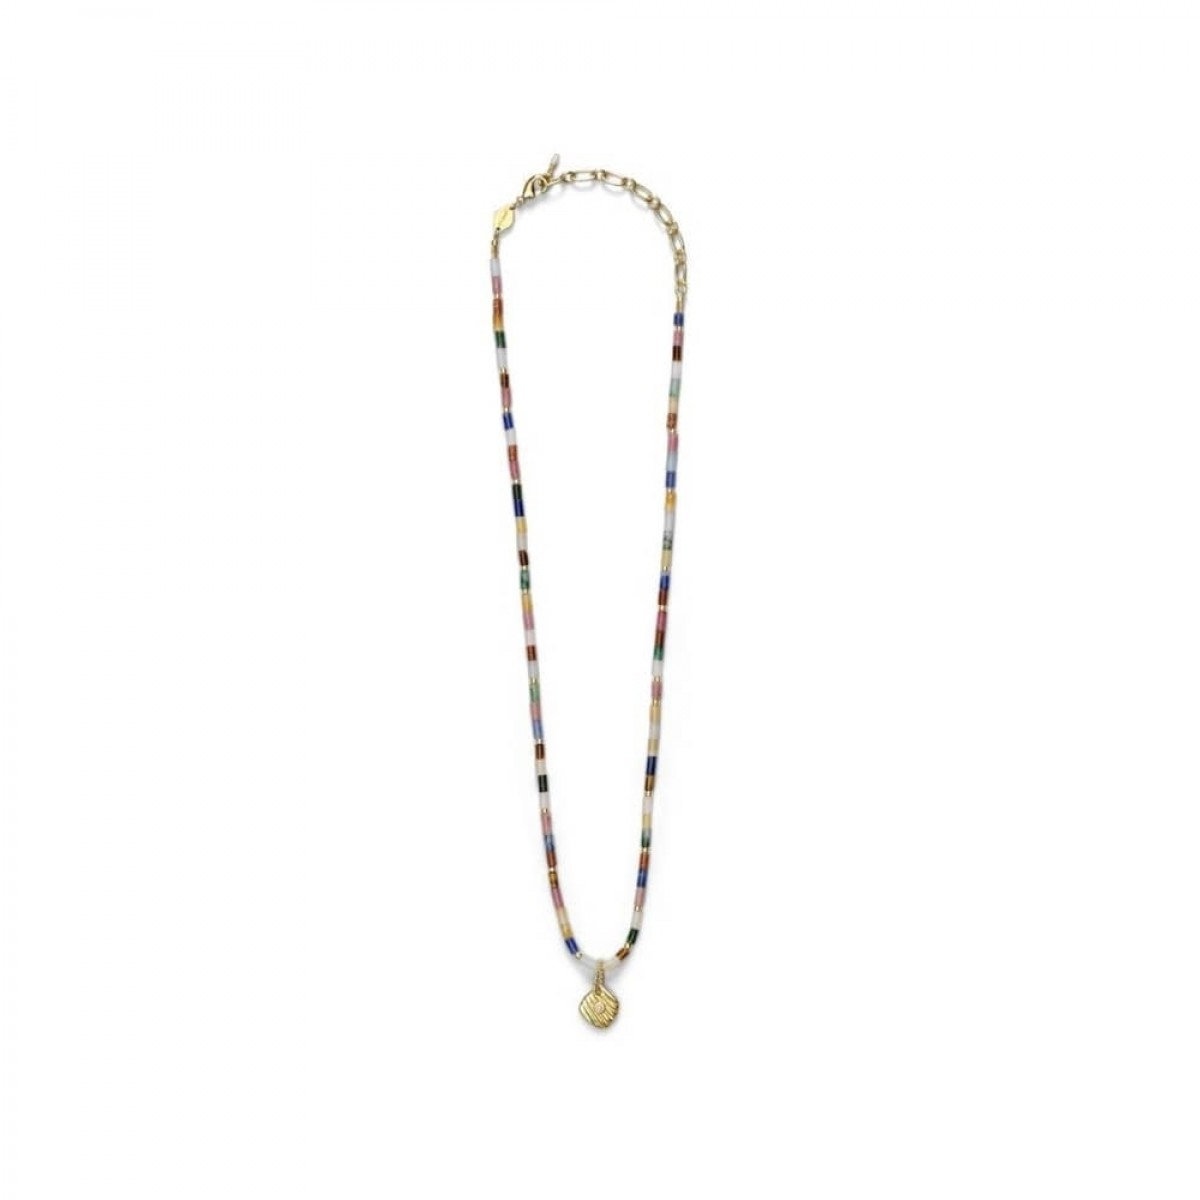 anni lu oceano necklace - gold - font